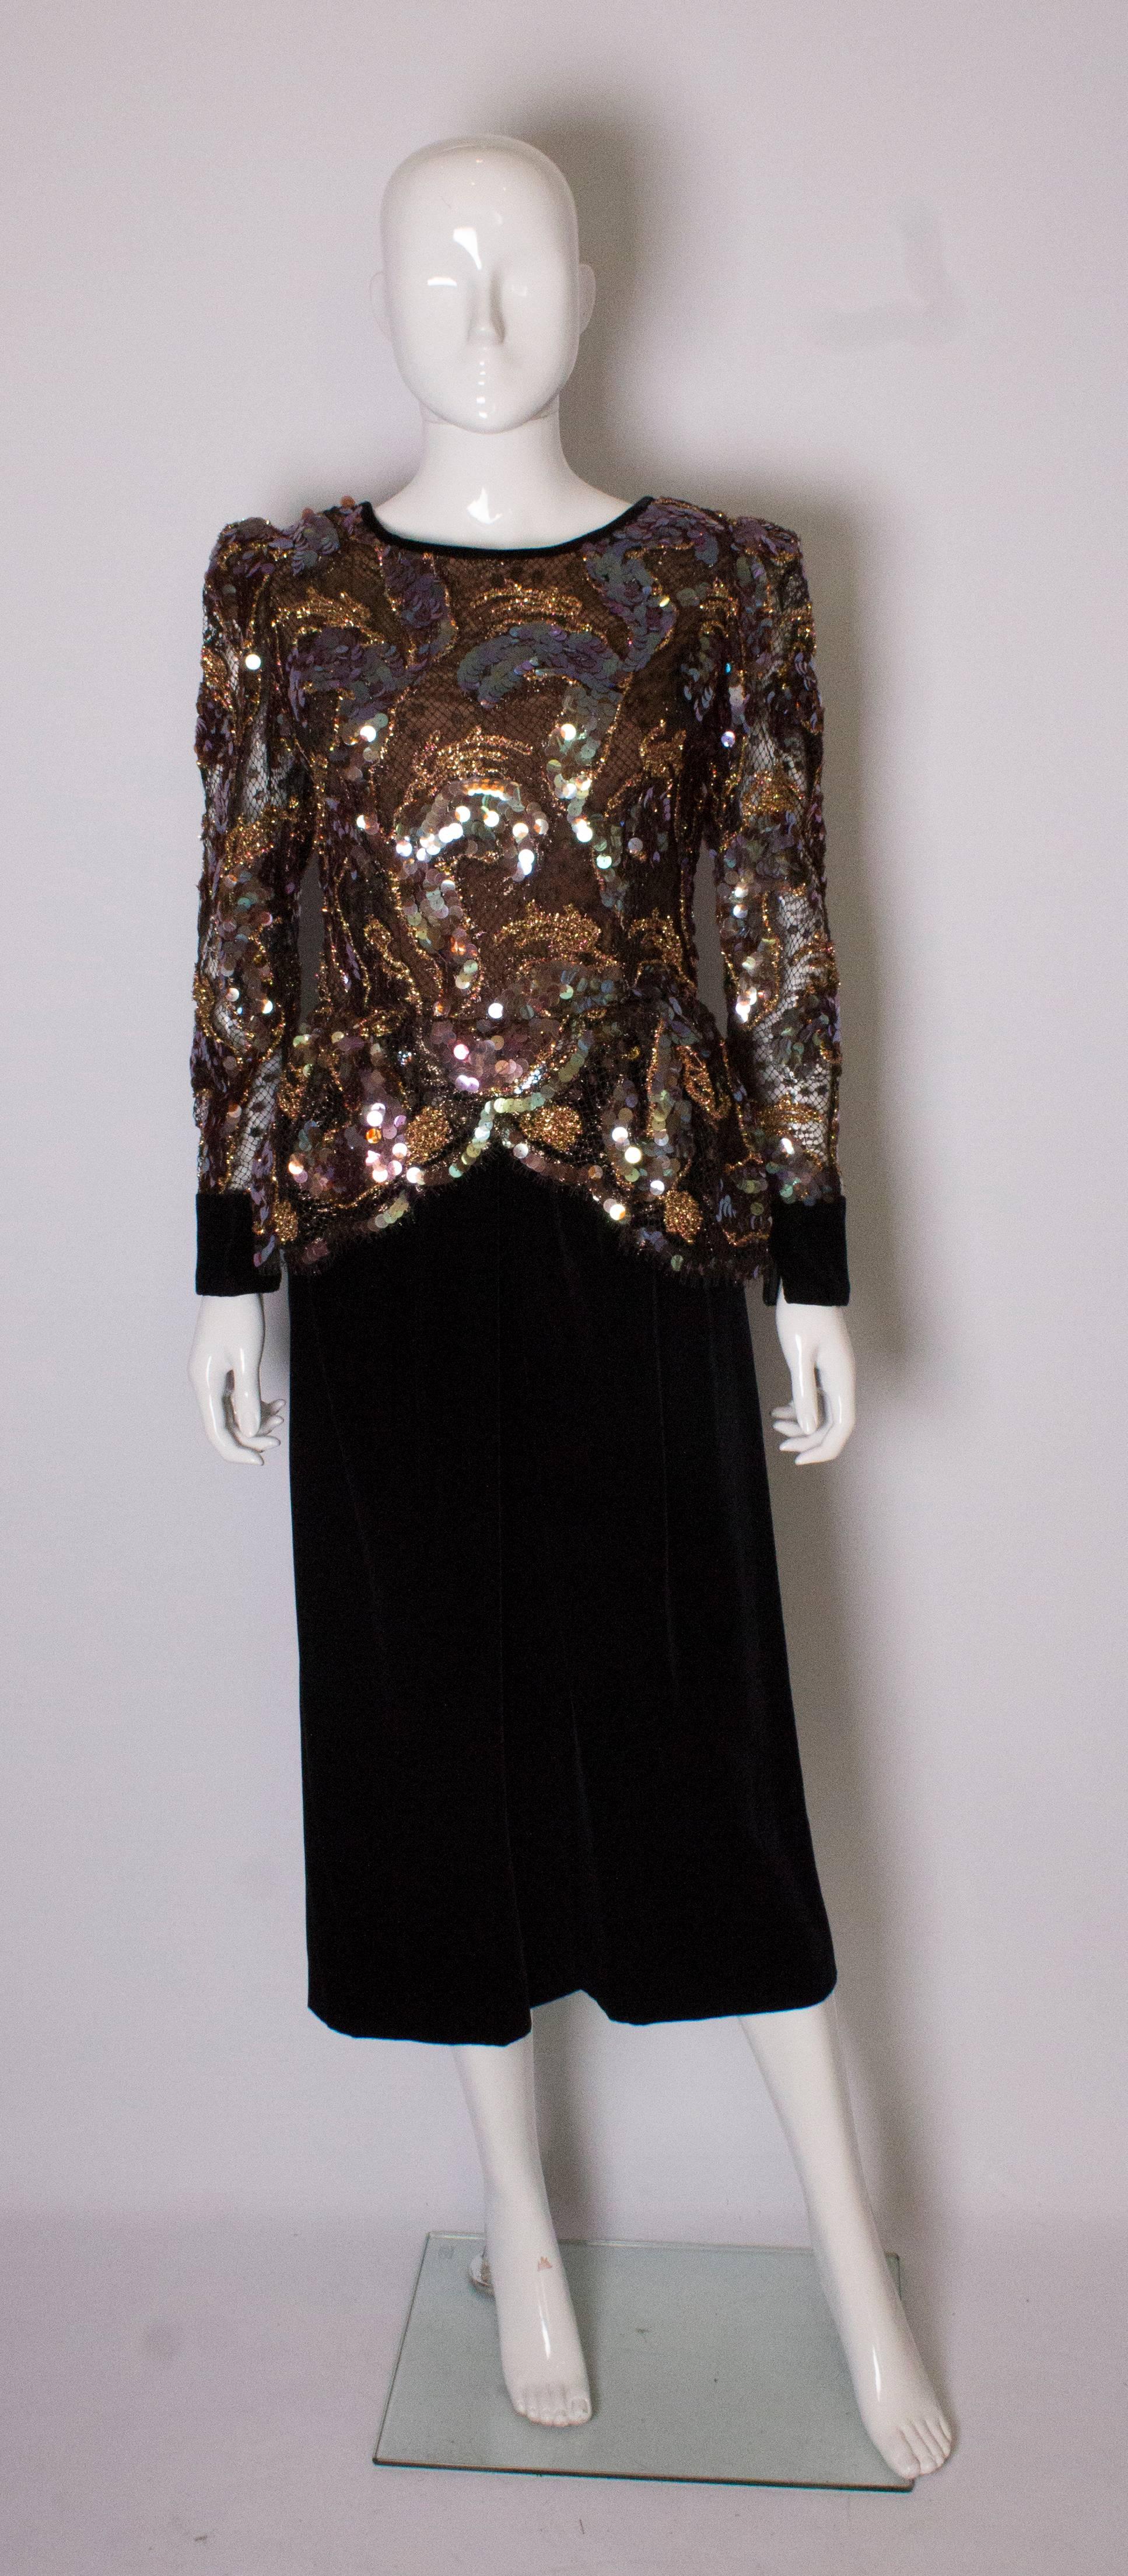 A stunning cocktail dress, the body is sequins and trim on net  ( lined) with the same fabric on the sleeves but unlined. The body has a wrap over peplum, and a scoop neckline at the back. The skirt is a rich brown velvet.